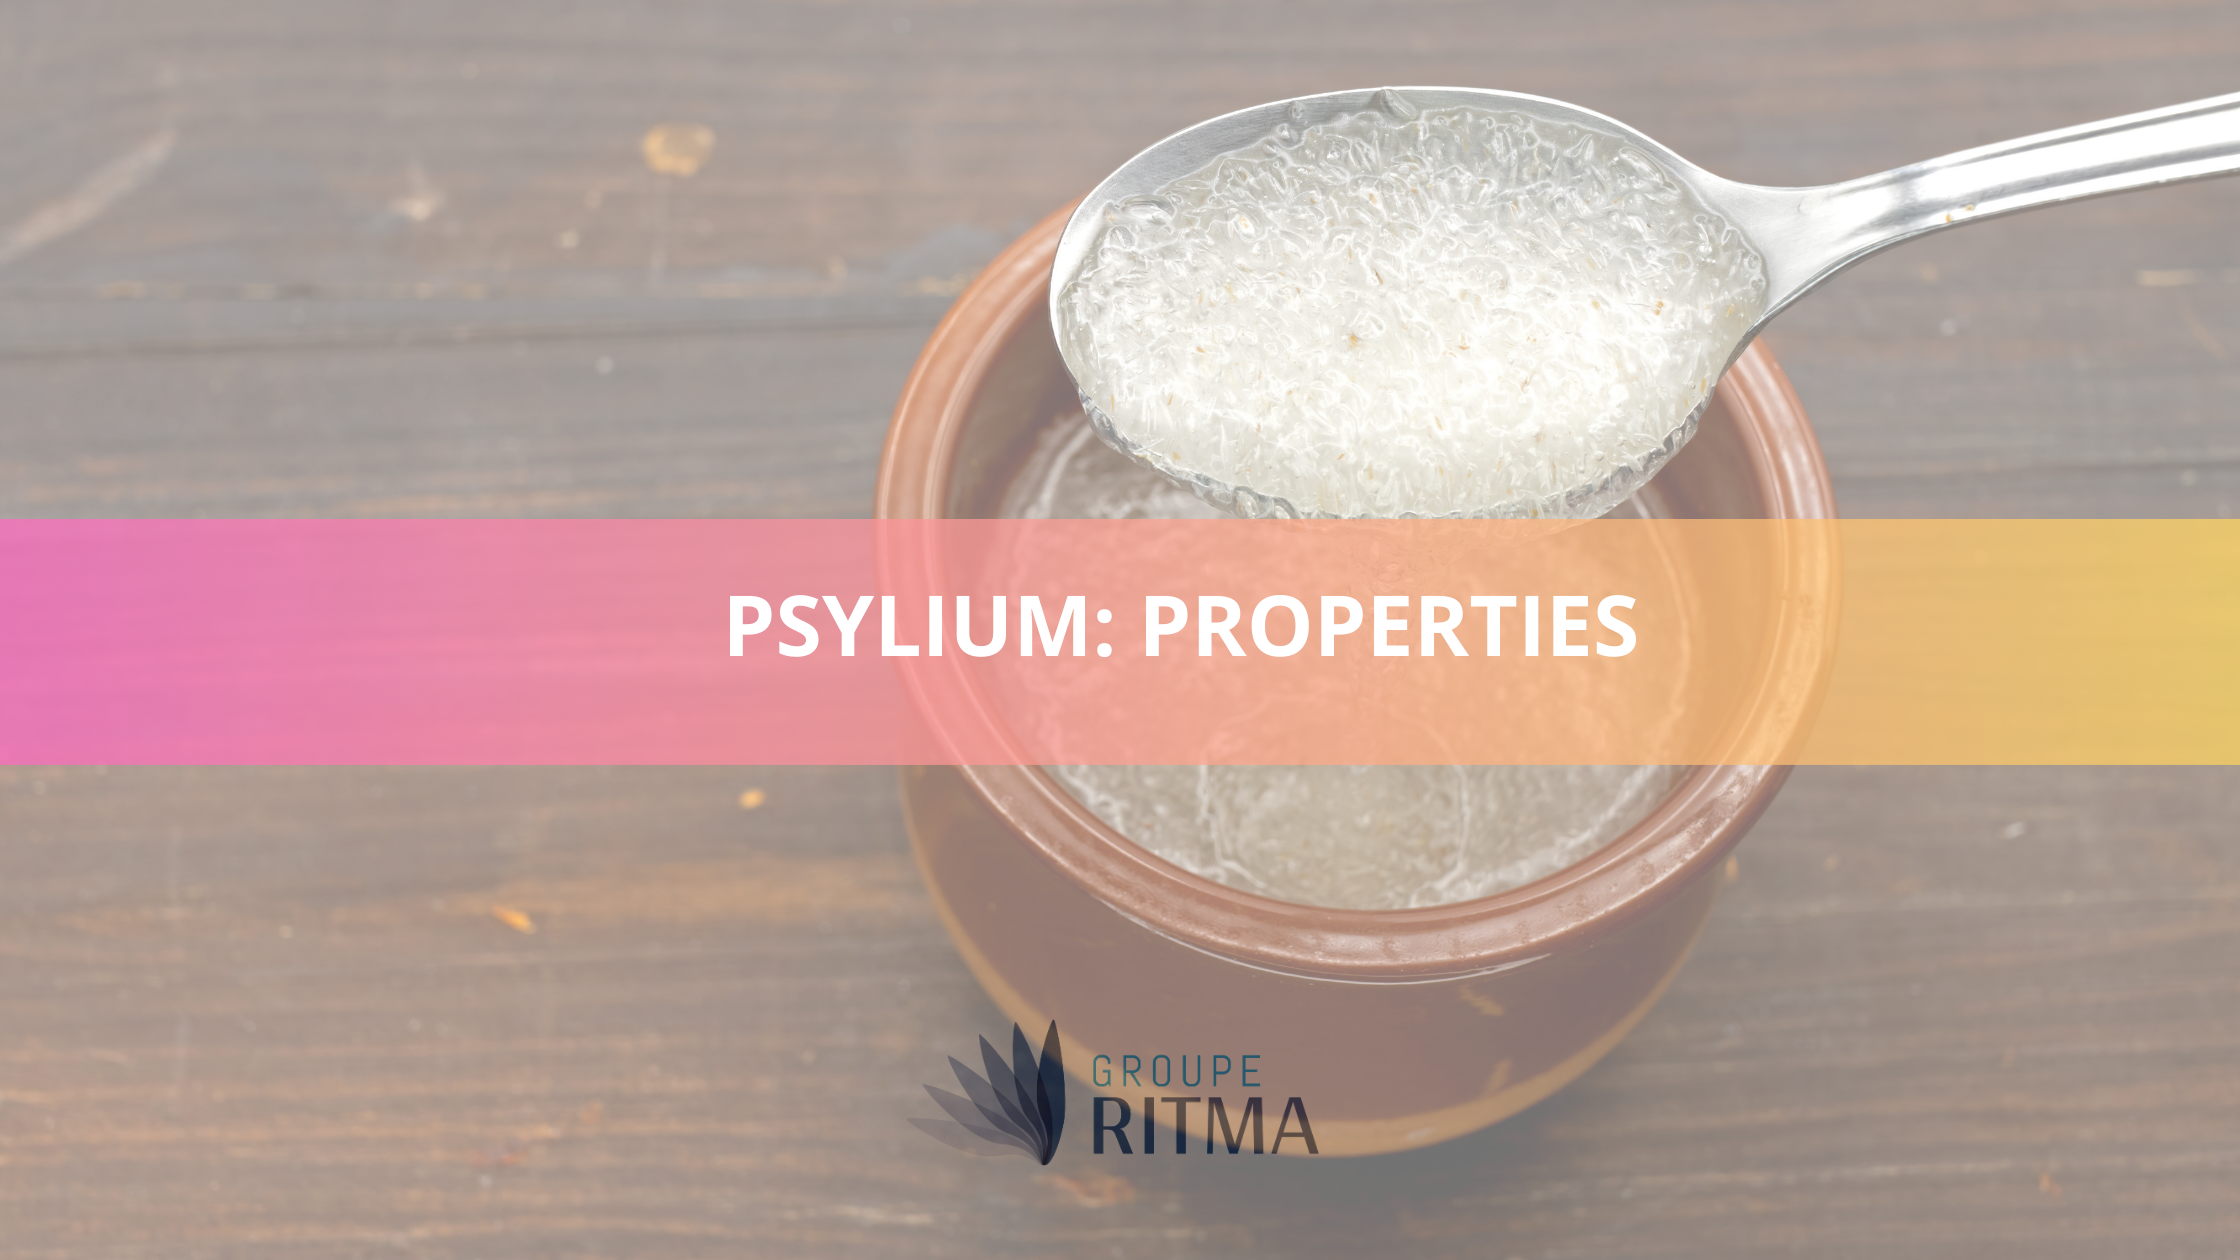 What you need to know about Psyllium